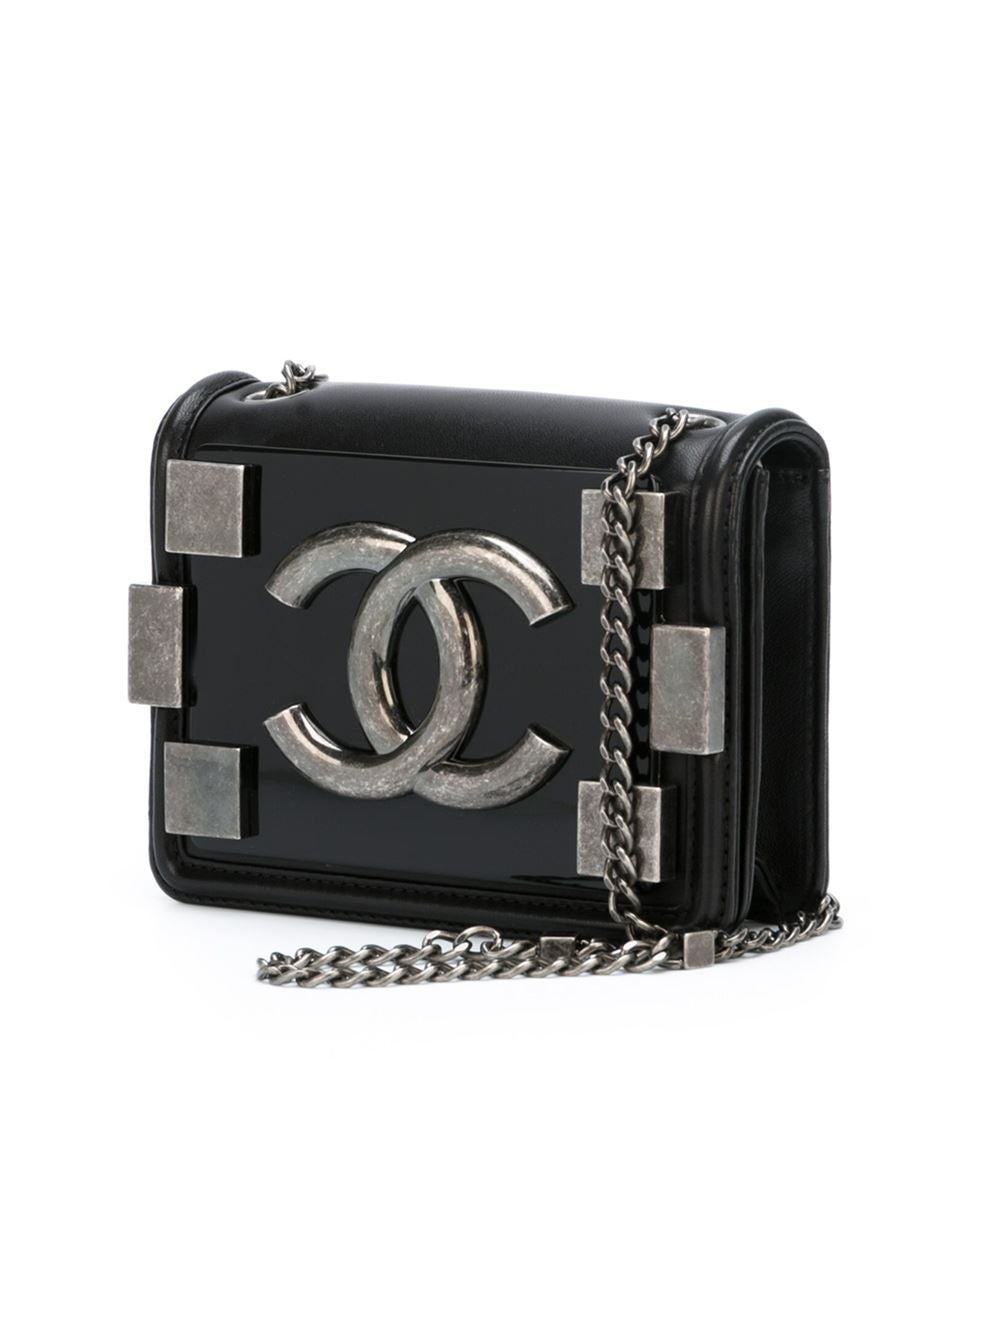 This black lambskin 'Boy Brick' flap crossbody bag from Chanel features a front flap closure, a silver-tone logo plaque, silver-tone hardware, a chain and leather strap, an internal slip pocket, an internal logo patch and a quilted back